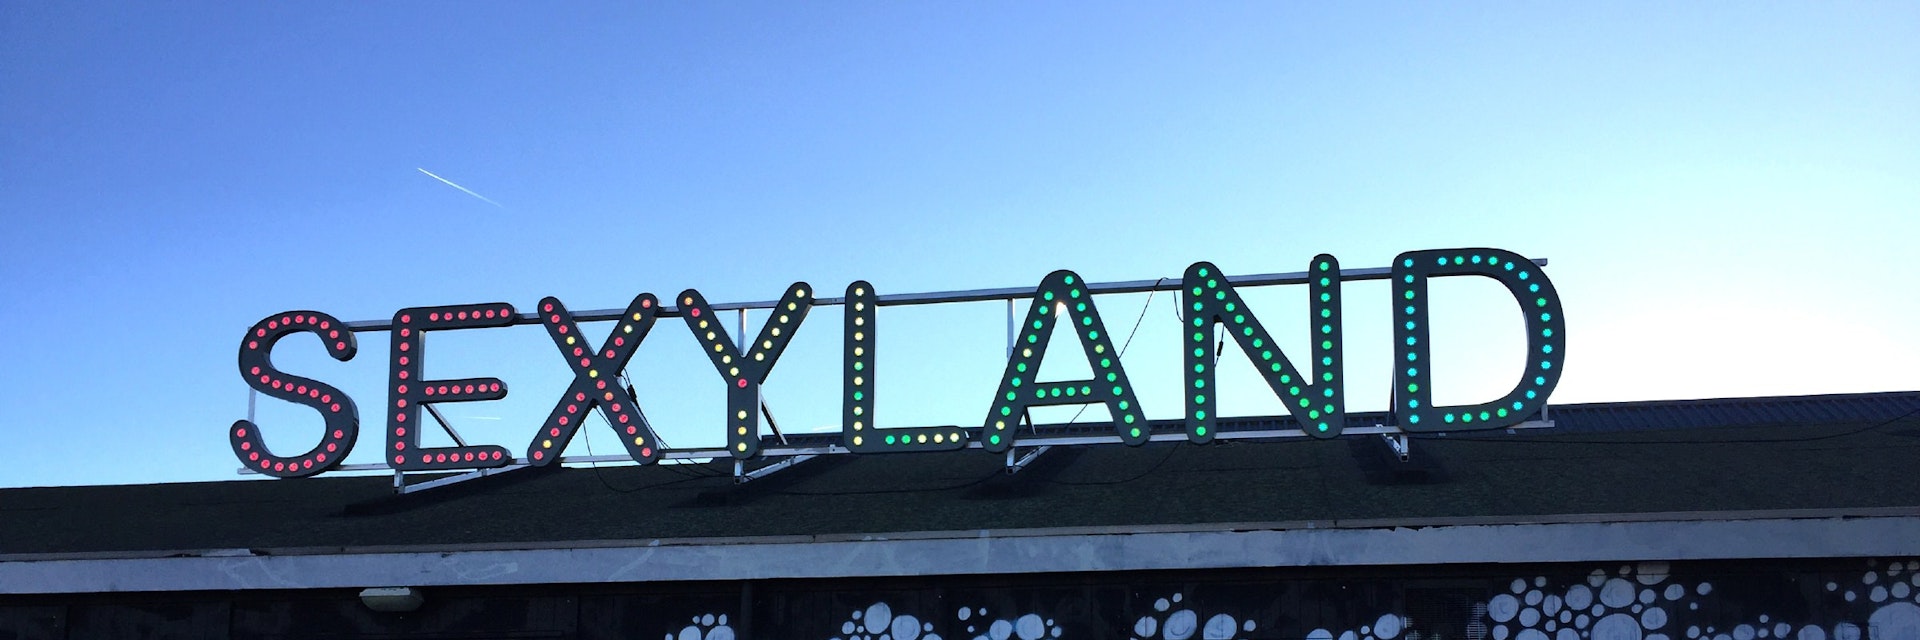 Sexyland is a members' club located in Amsterdam Noord with weekly events open to the public